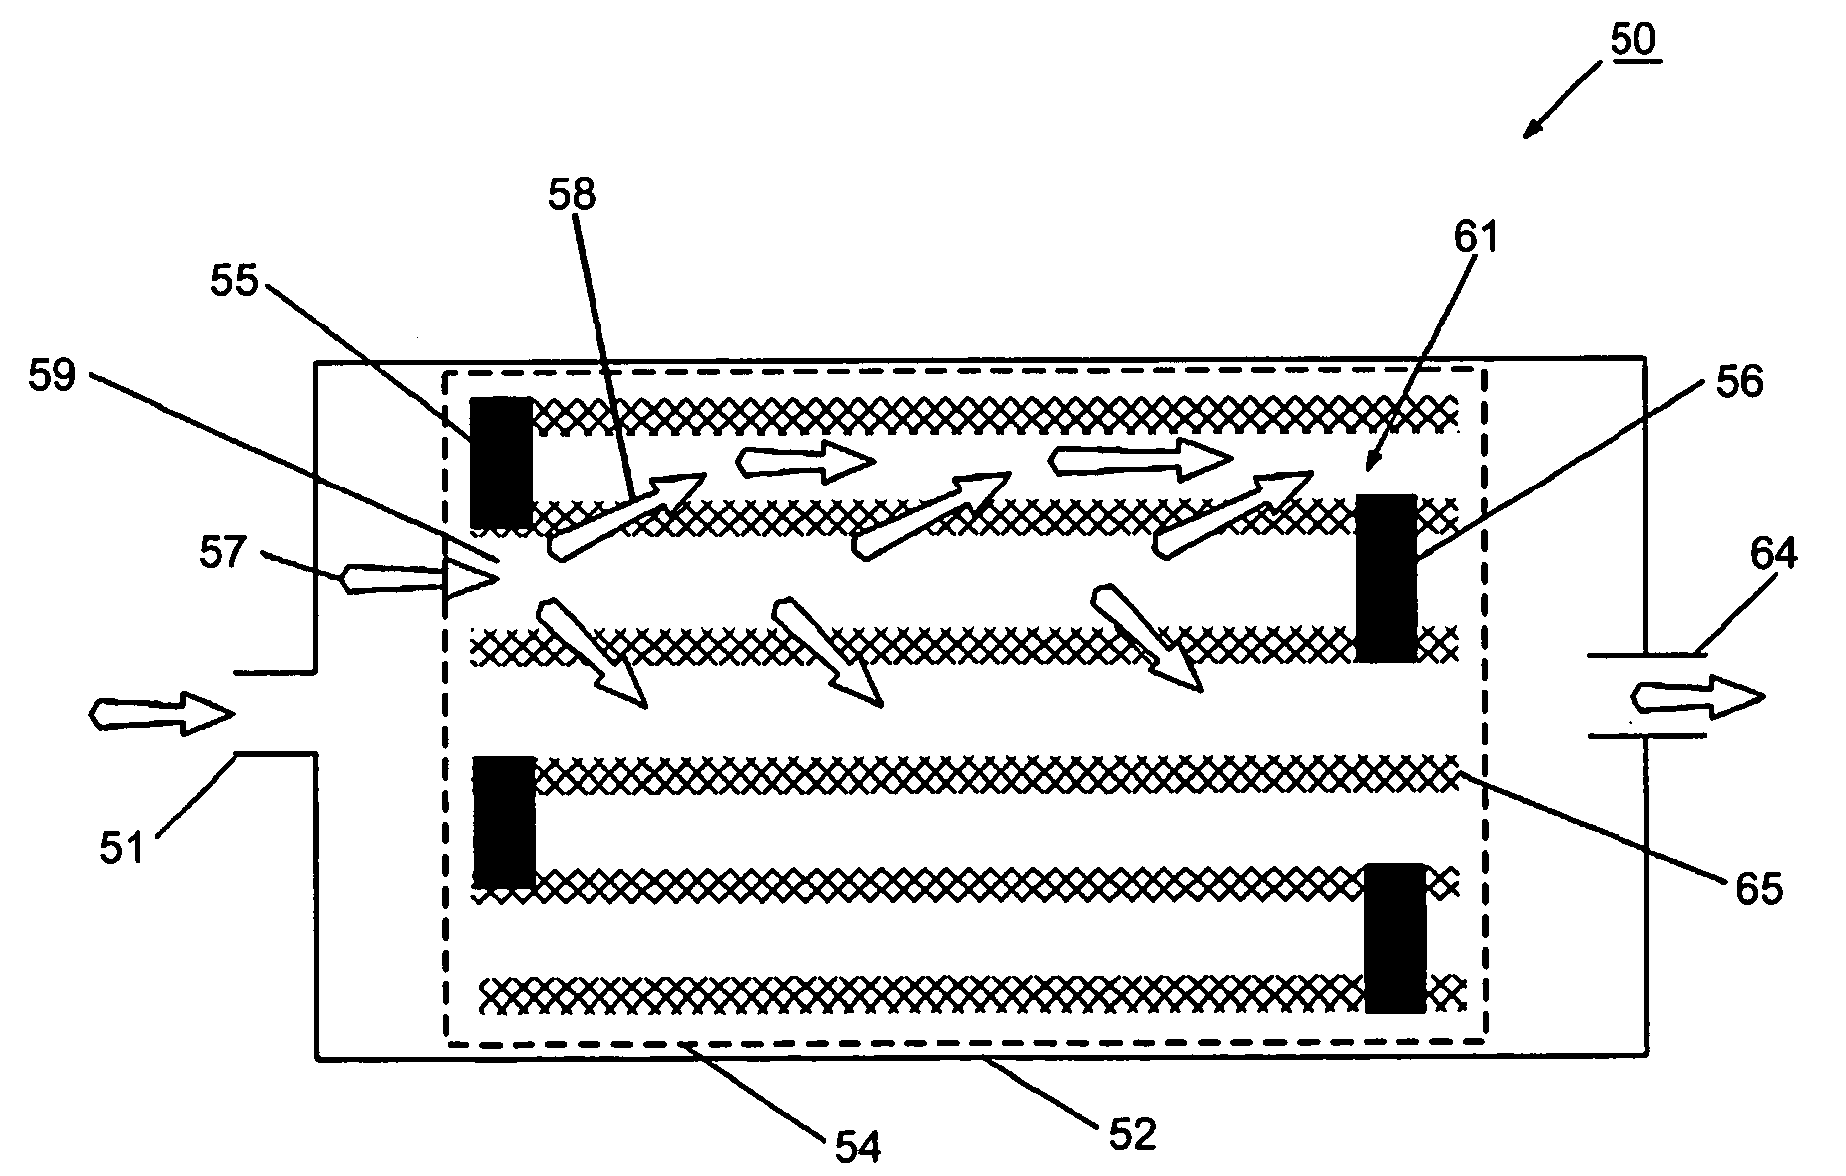 Multi-functional substantially fibrous mullite filtration substates and devices